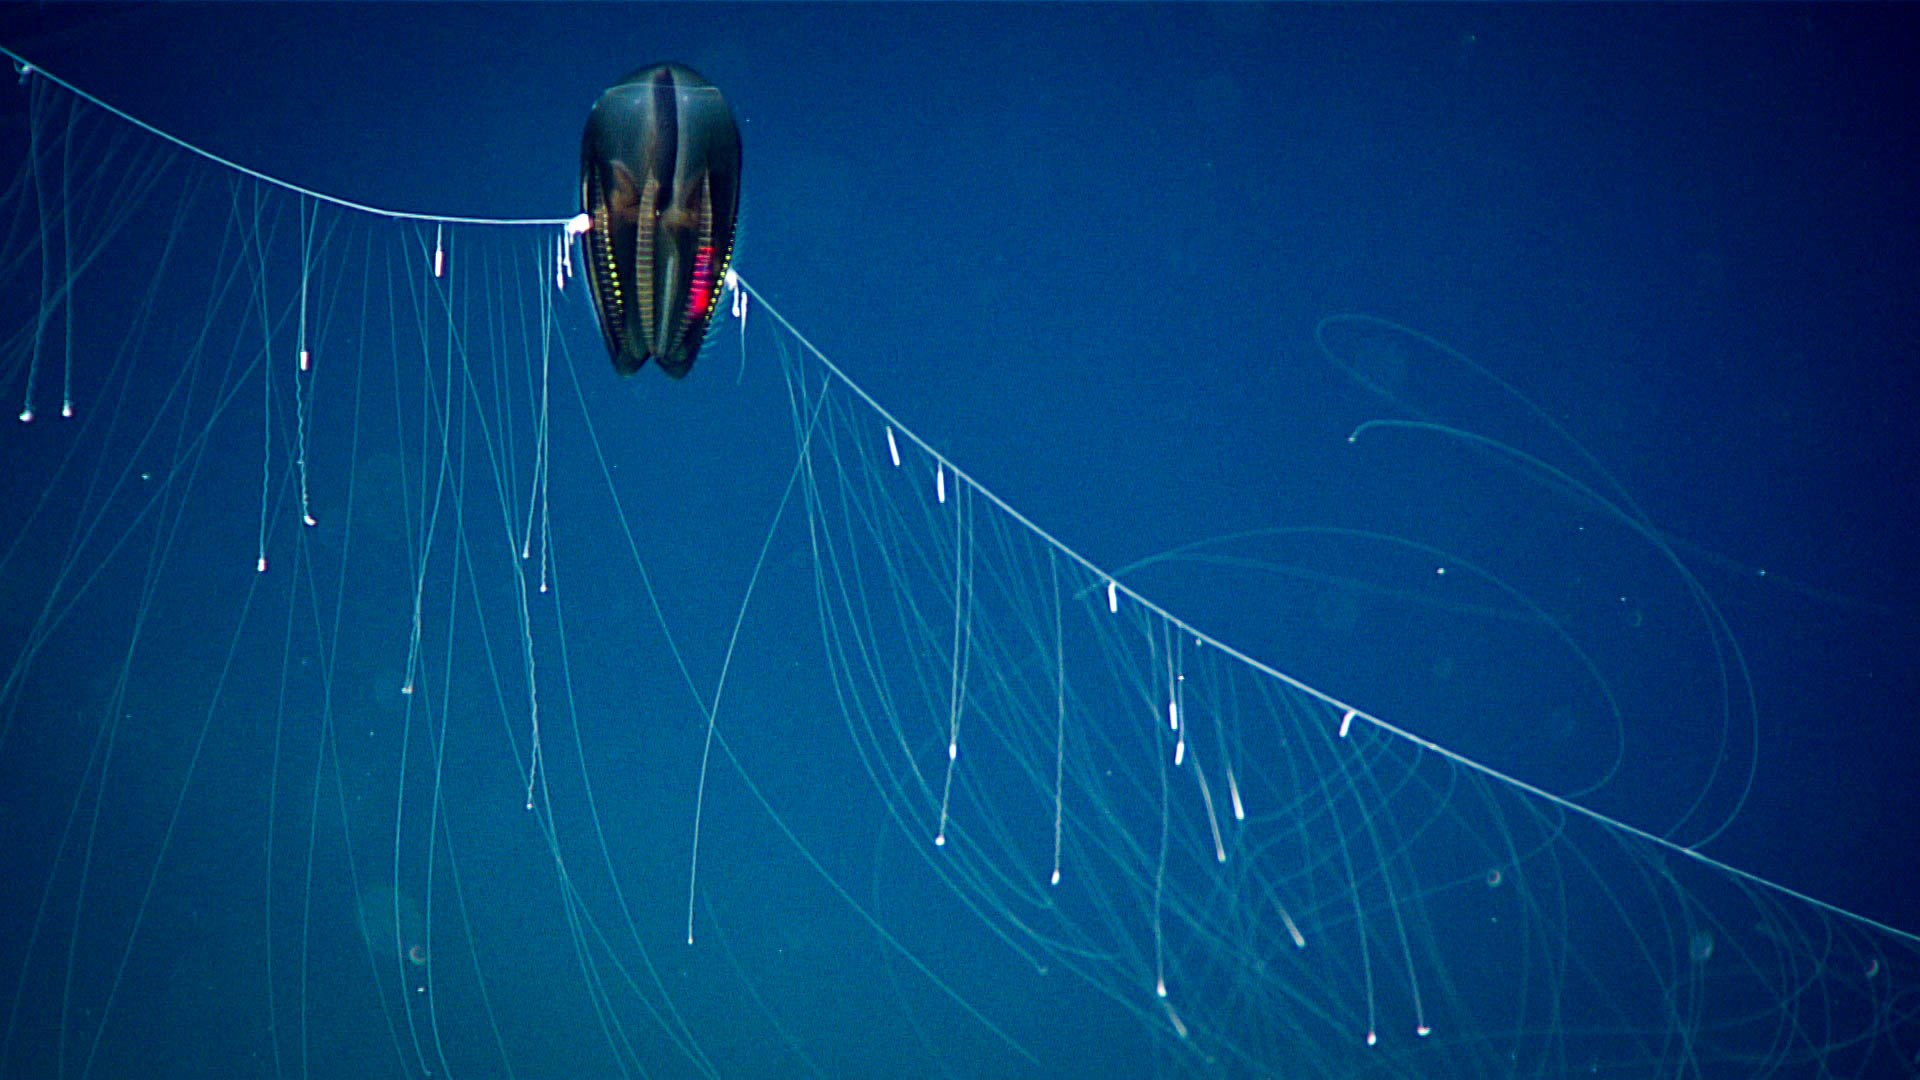 This dark ctenophore was observed with its tentacles fully extended at ~1,460 meters depth.